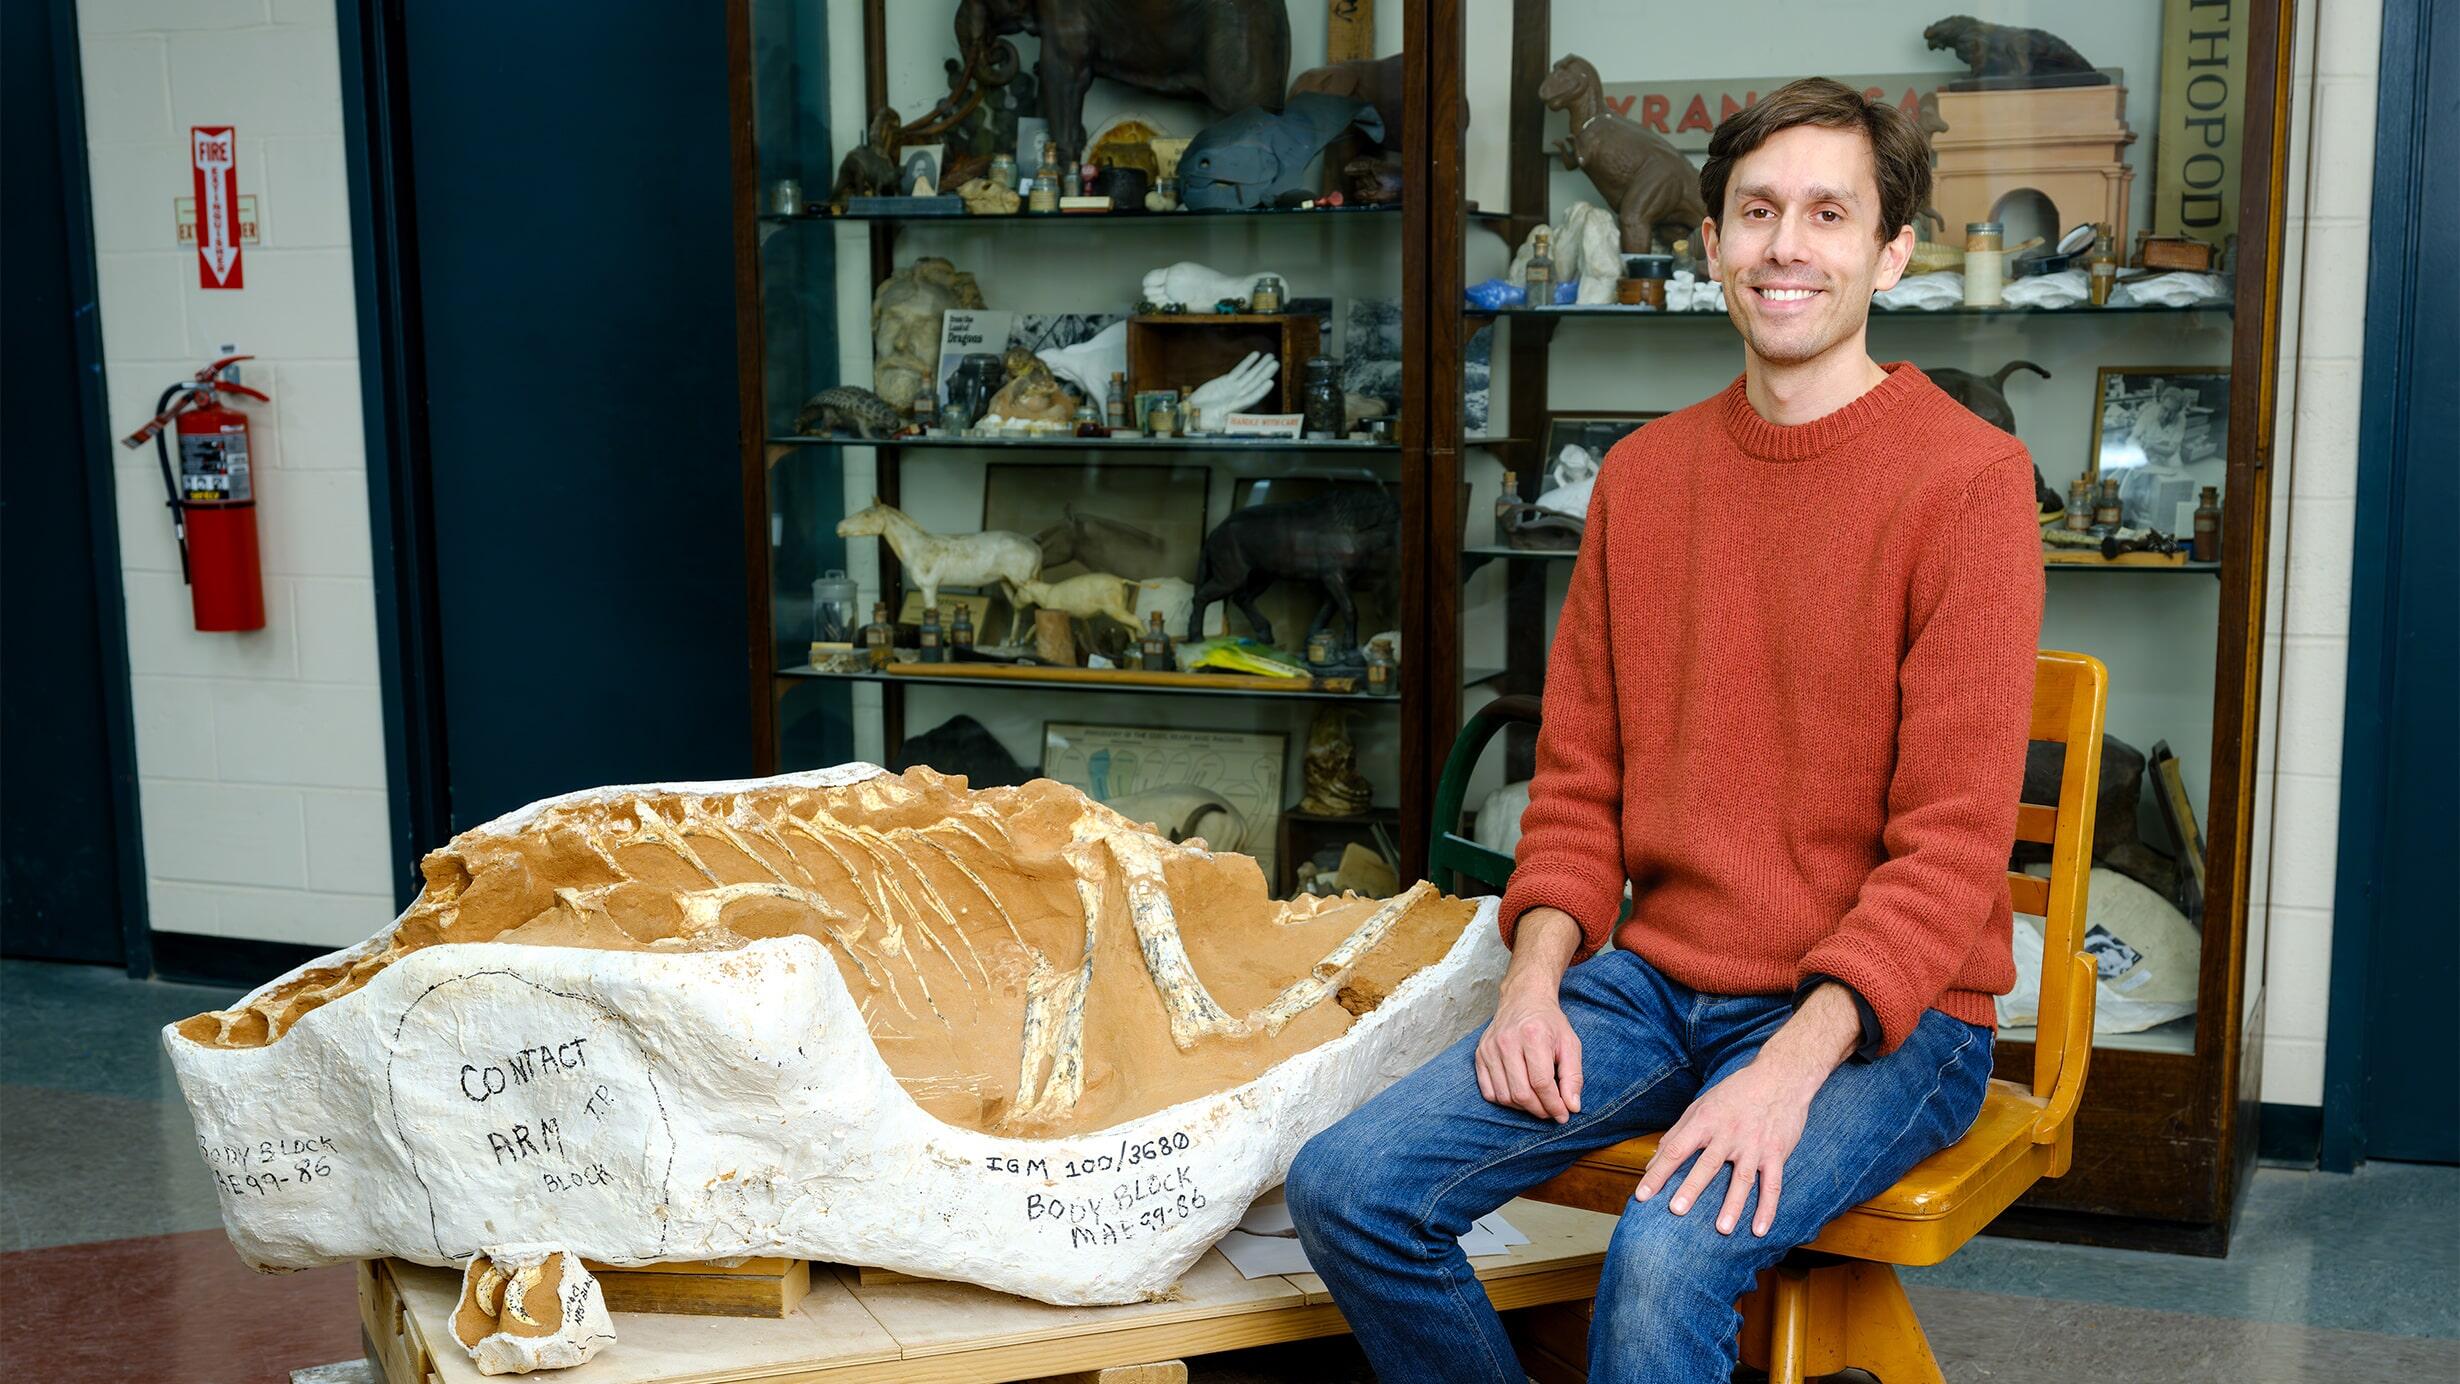 A photograph of Roger Benson, paleontologist, next to a large dinosaur fossil.